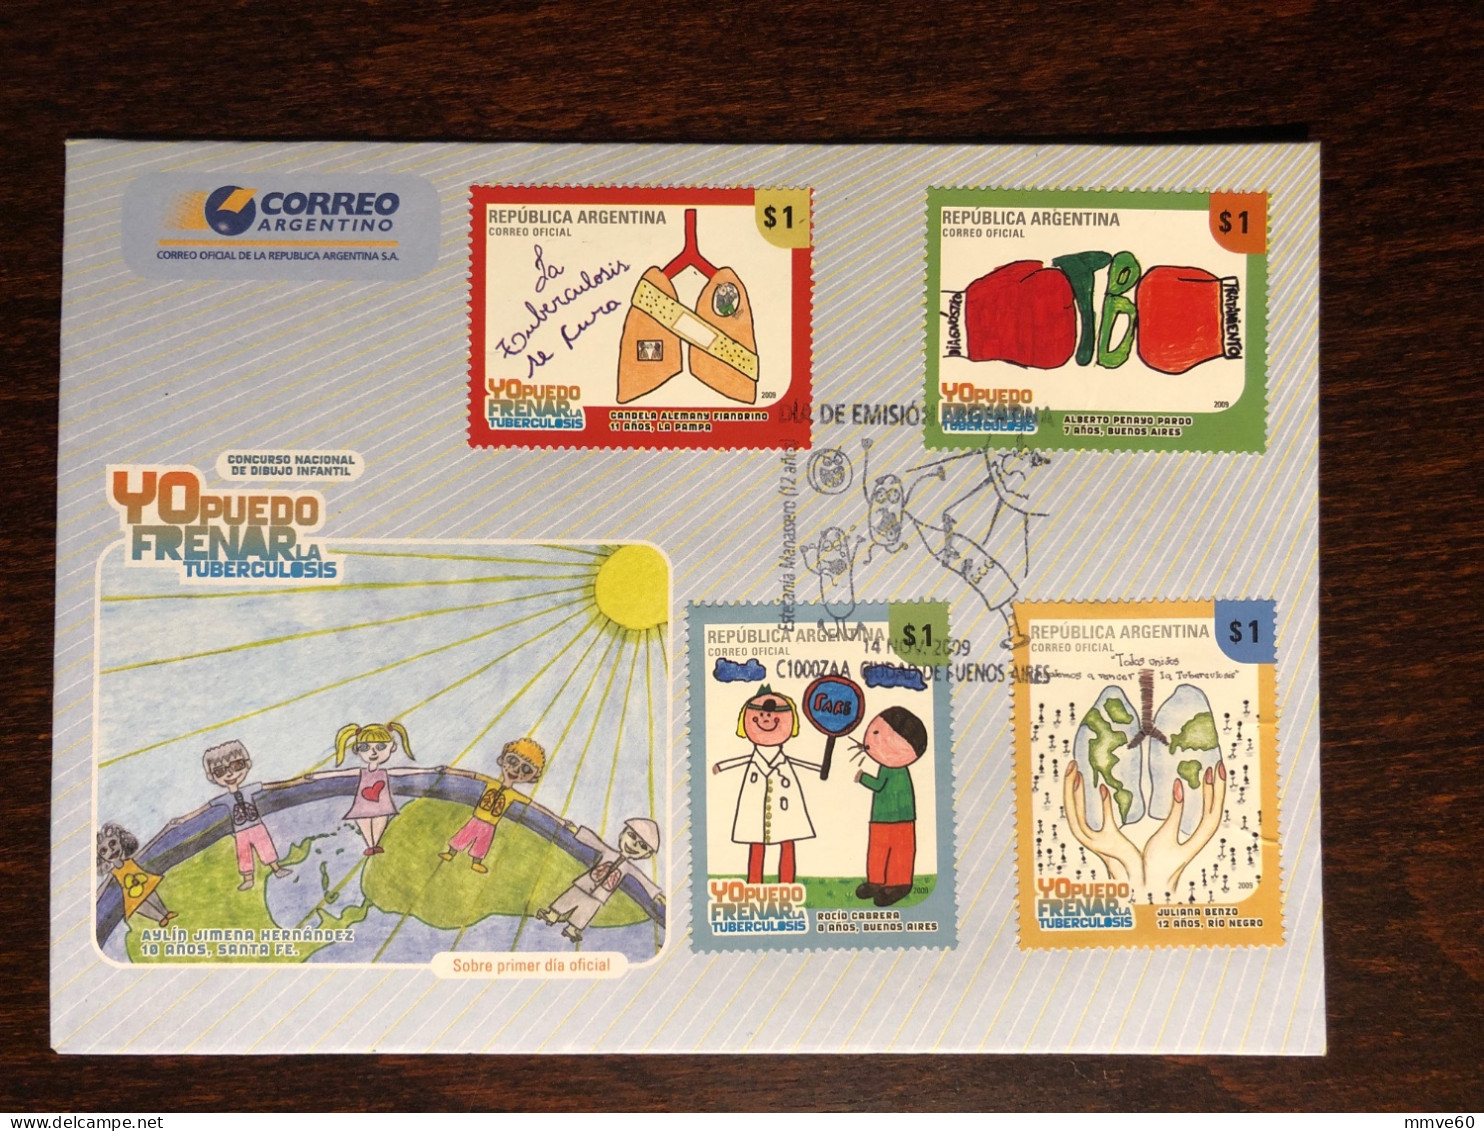 ARGENTINA FDC COVER 2009 YEAR TUBERCULOSIS TBC HEALTH MEDICINE STAMPS - FDC